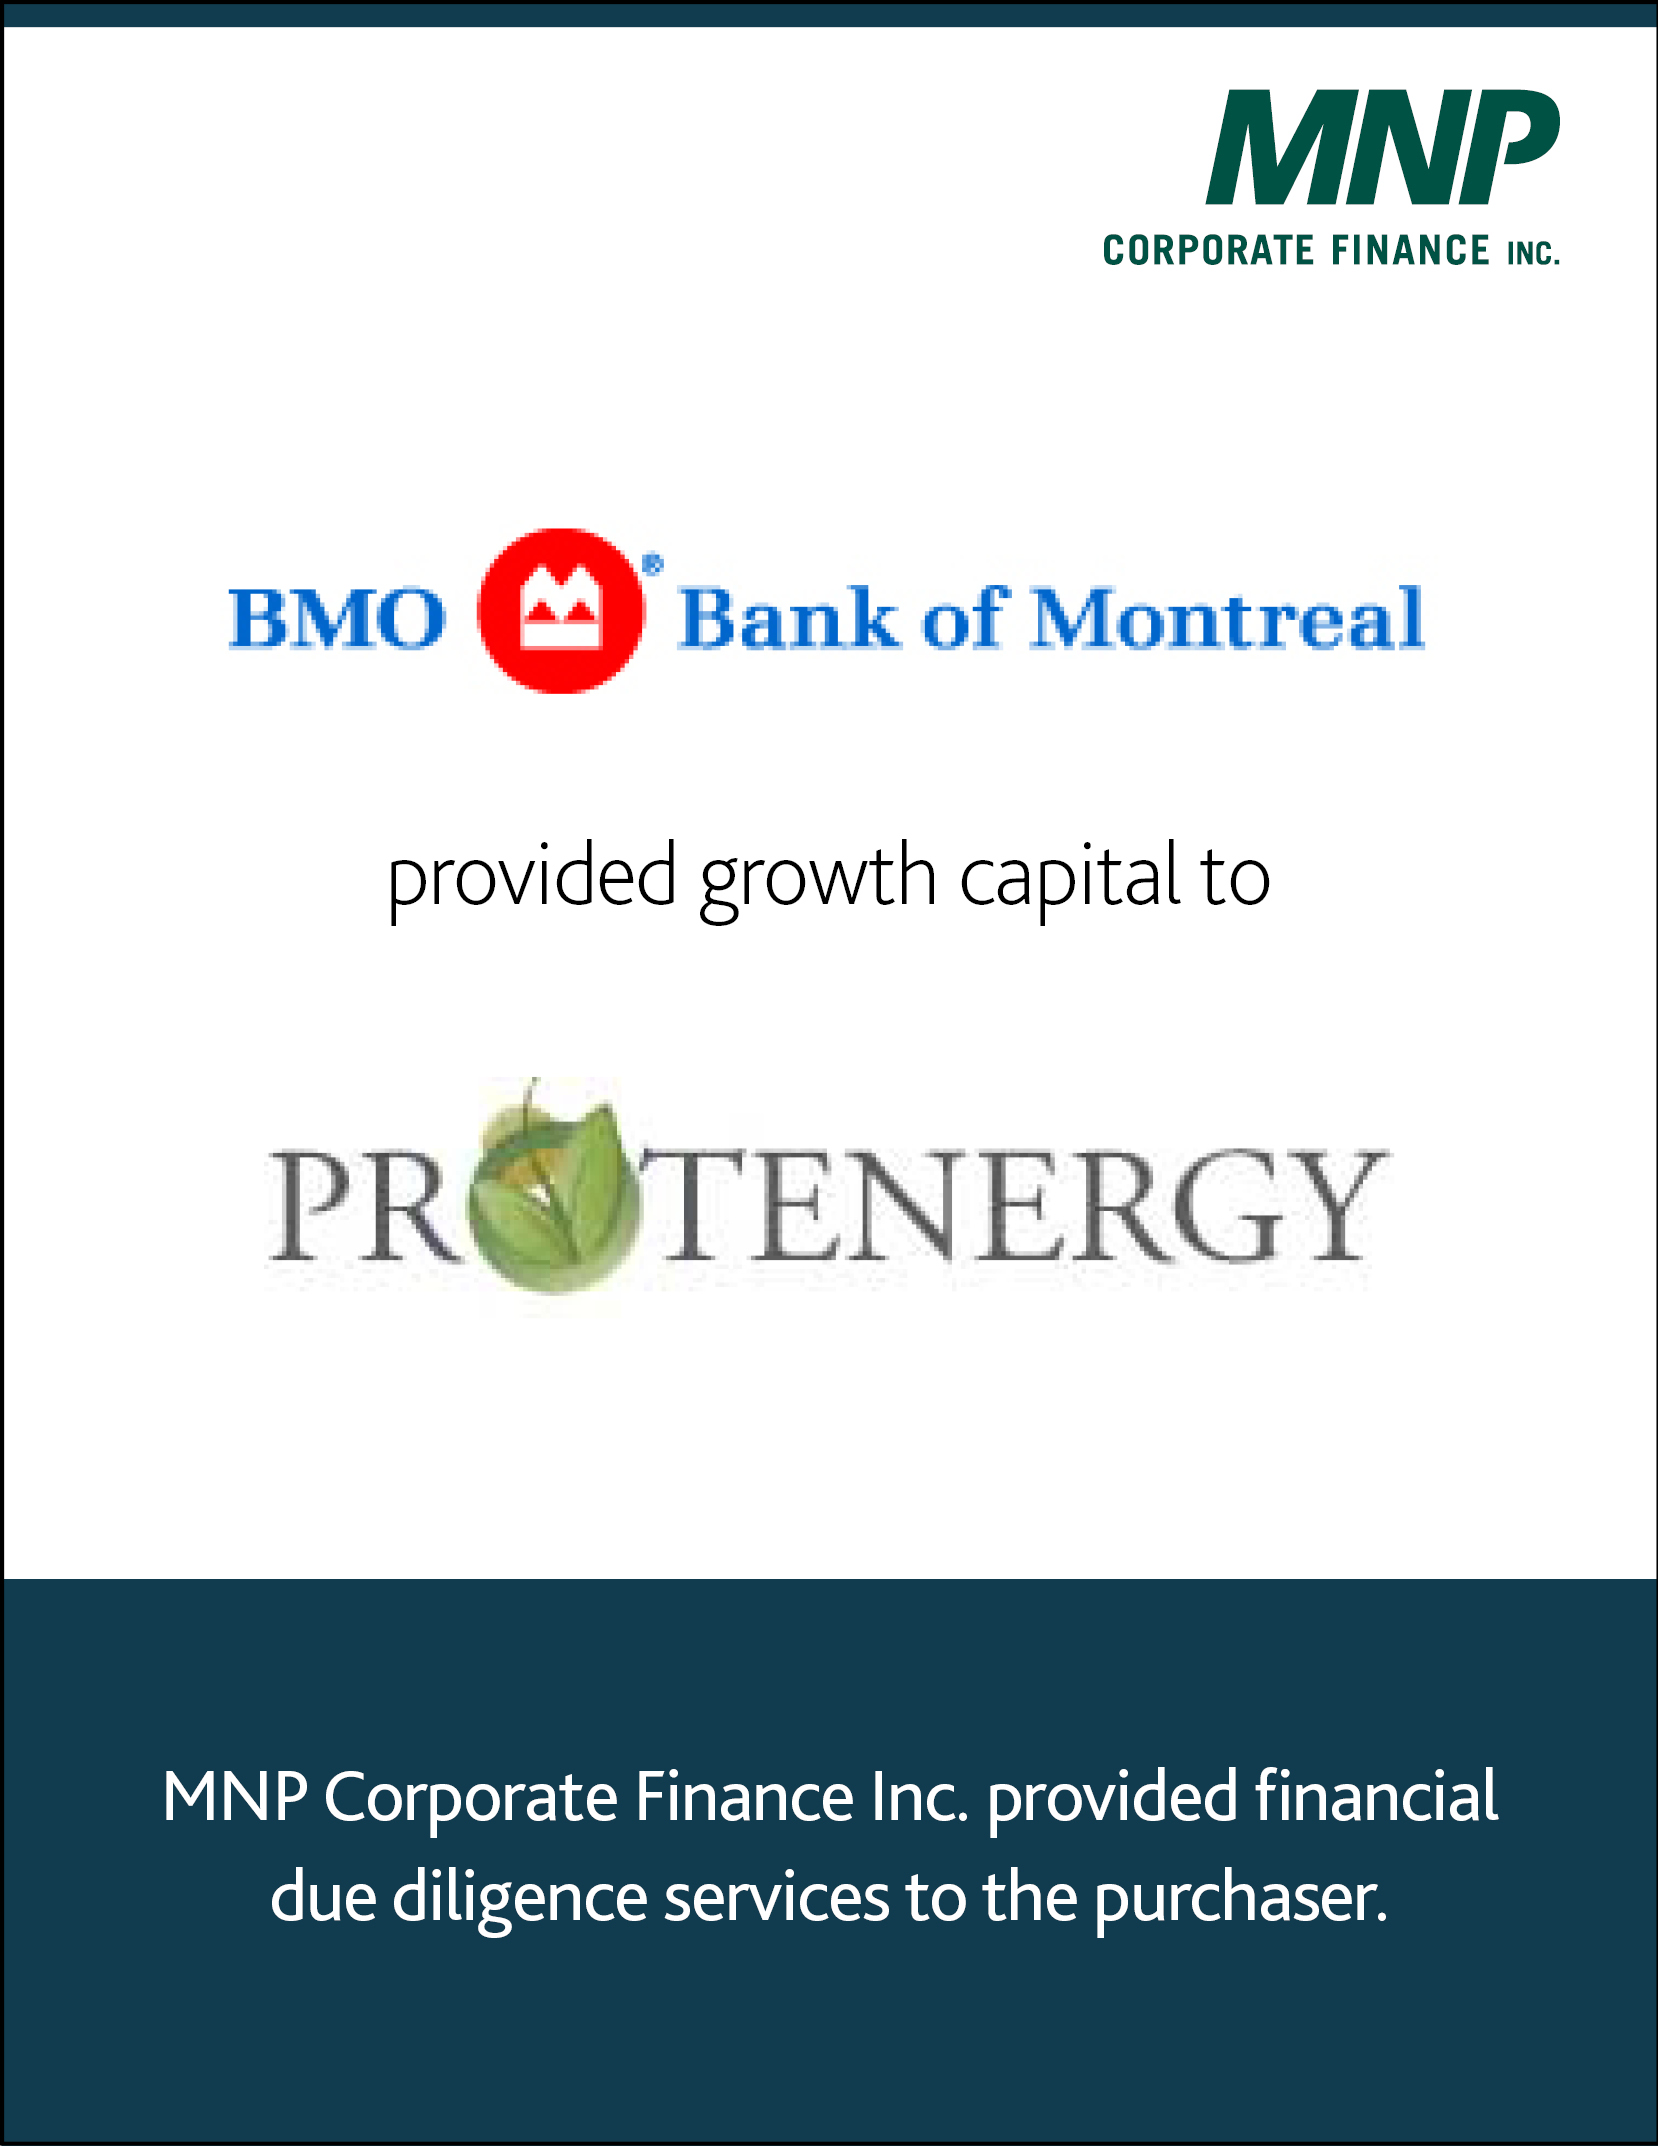 BMO Bank of Montreal provided growth capital to Protenergy